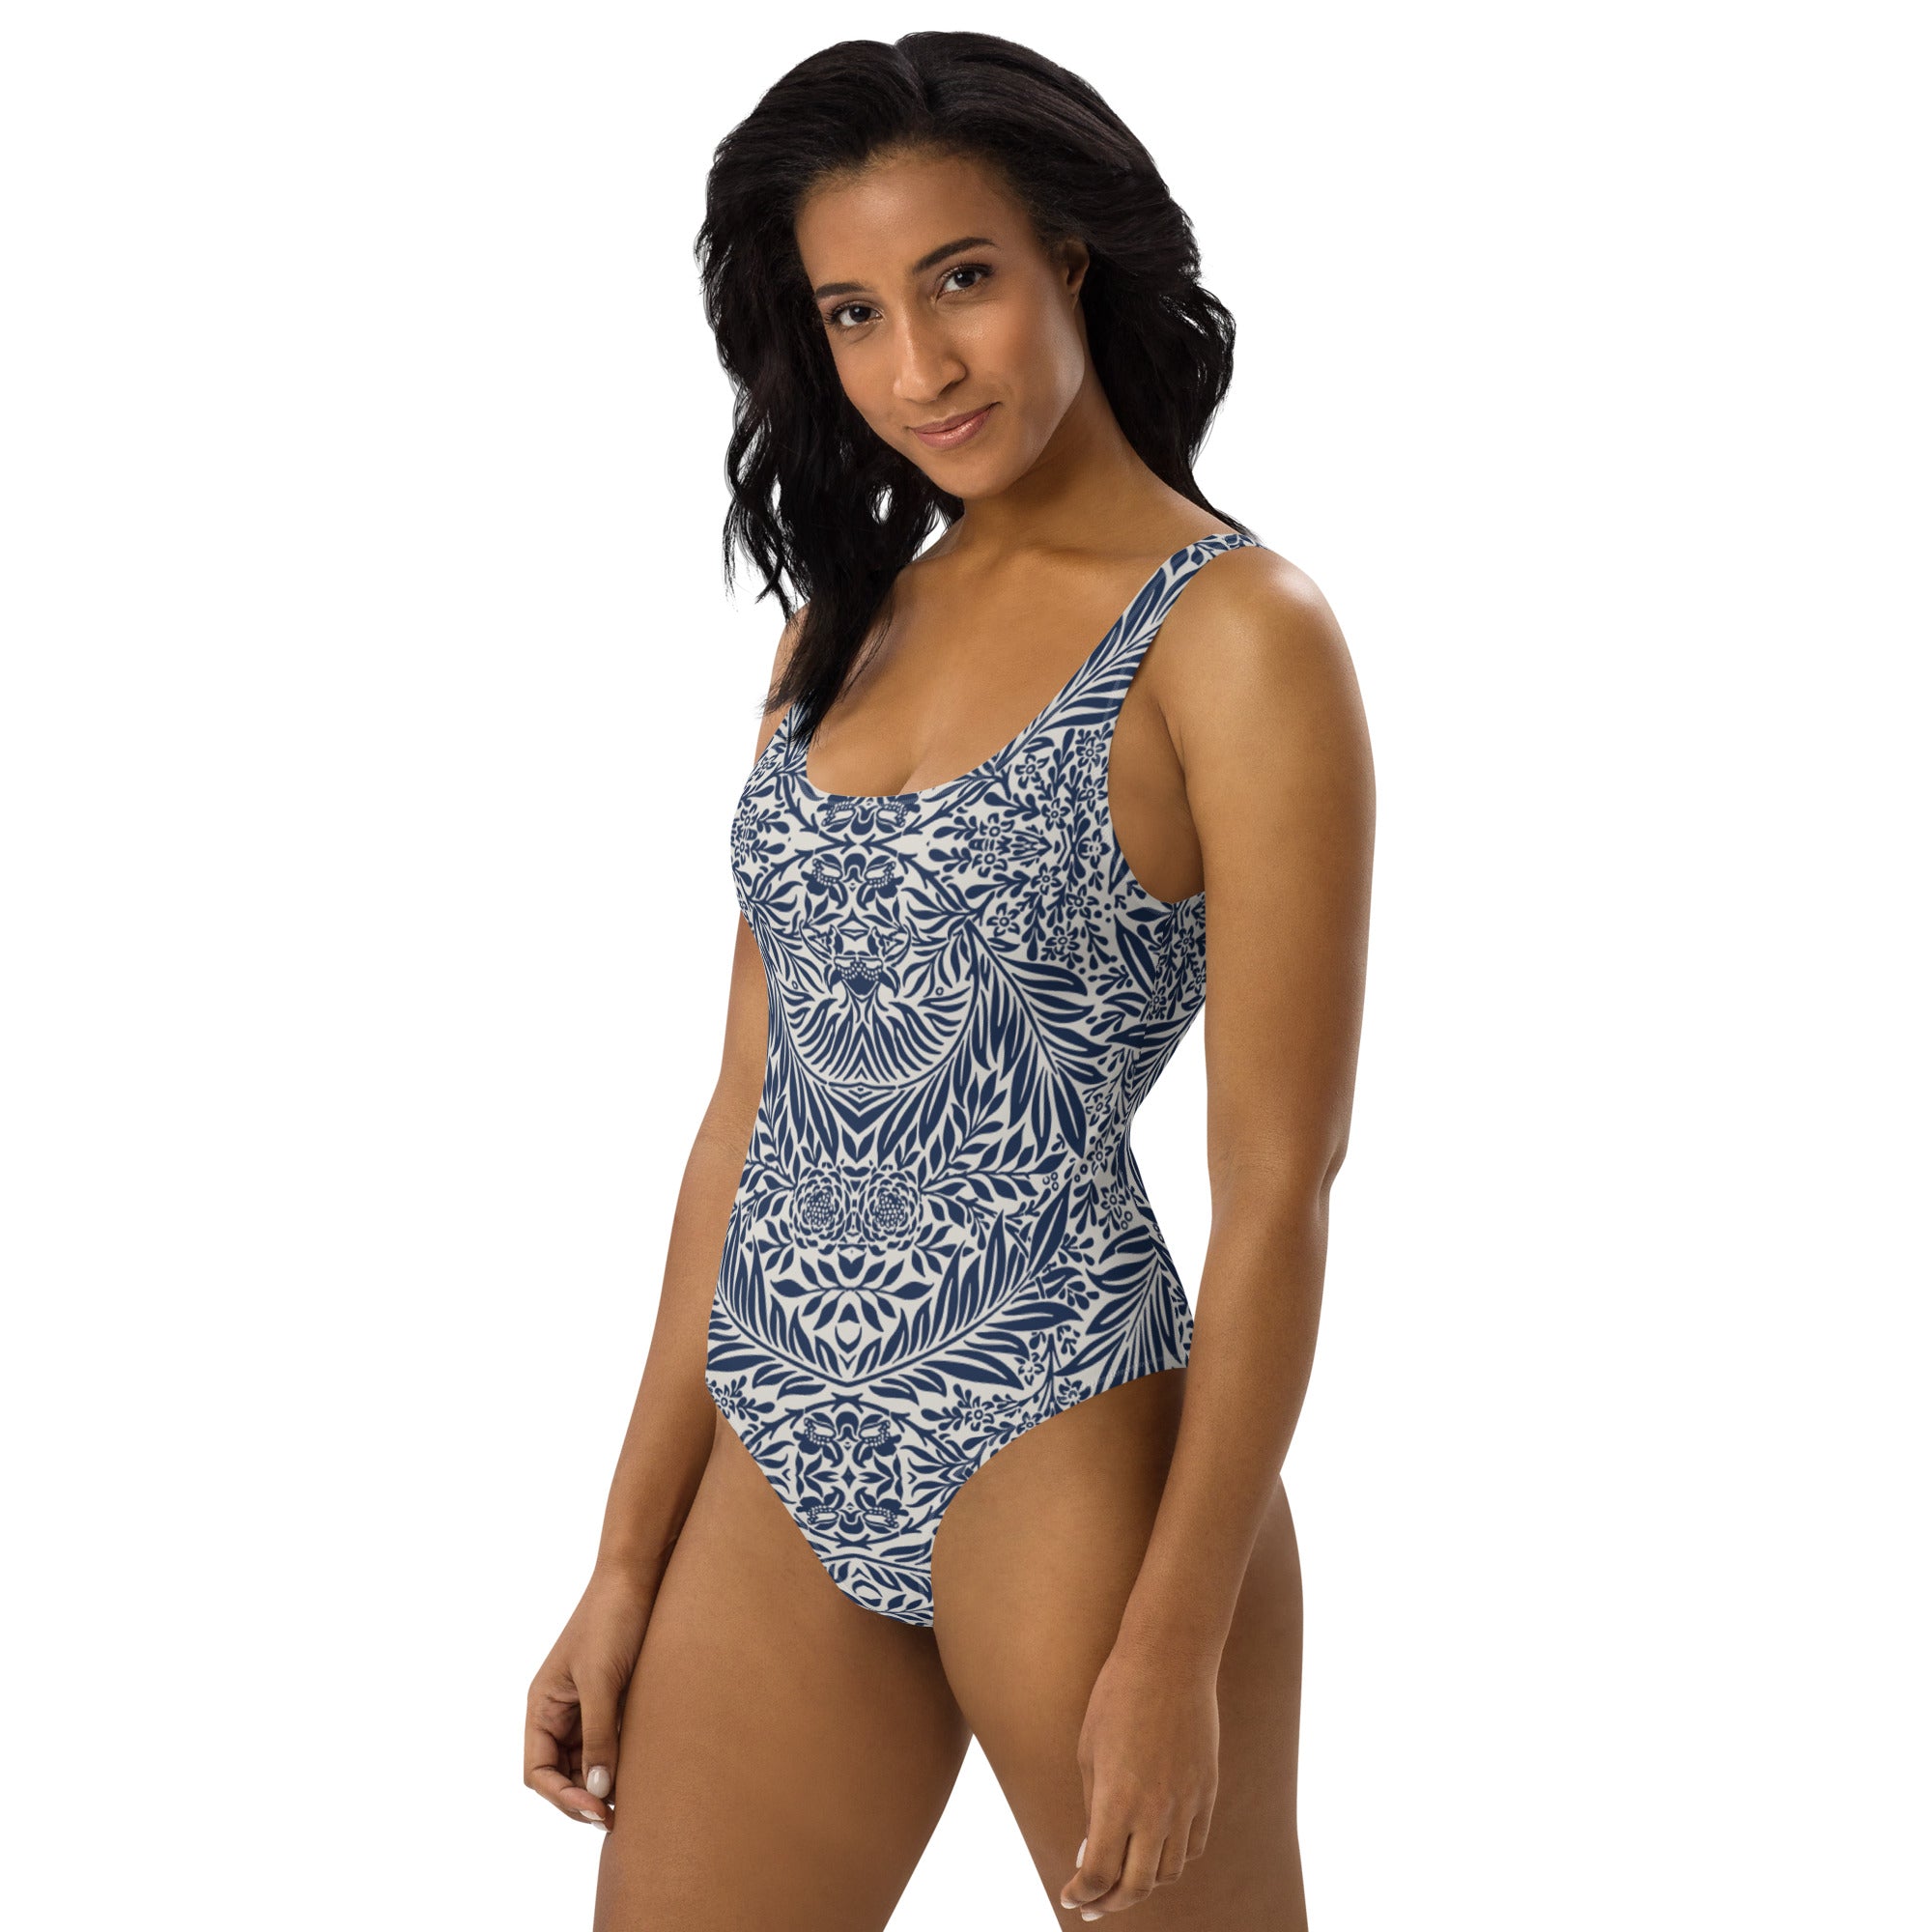 Blue and White Floral composition Stylish One-Piece Swimsuit, by Sensus Studio Design